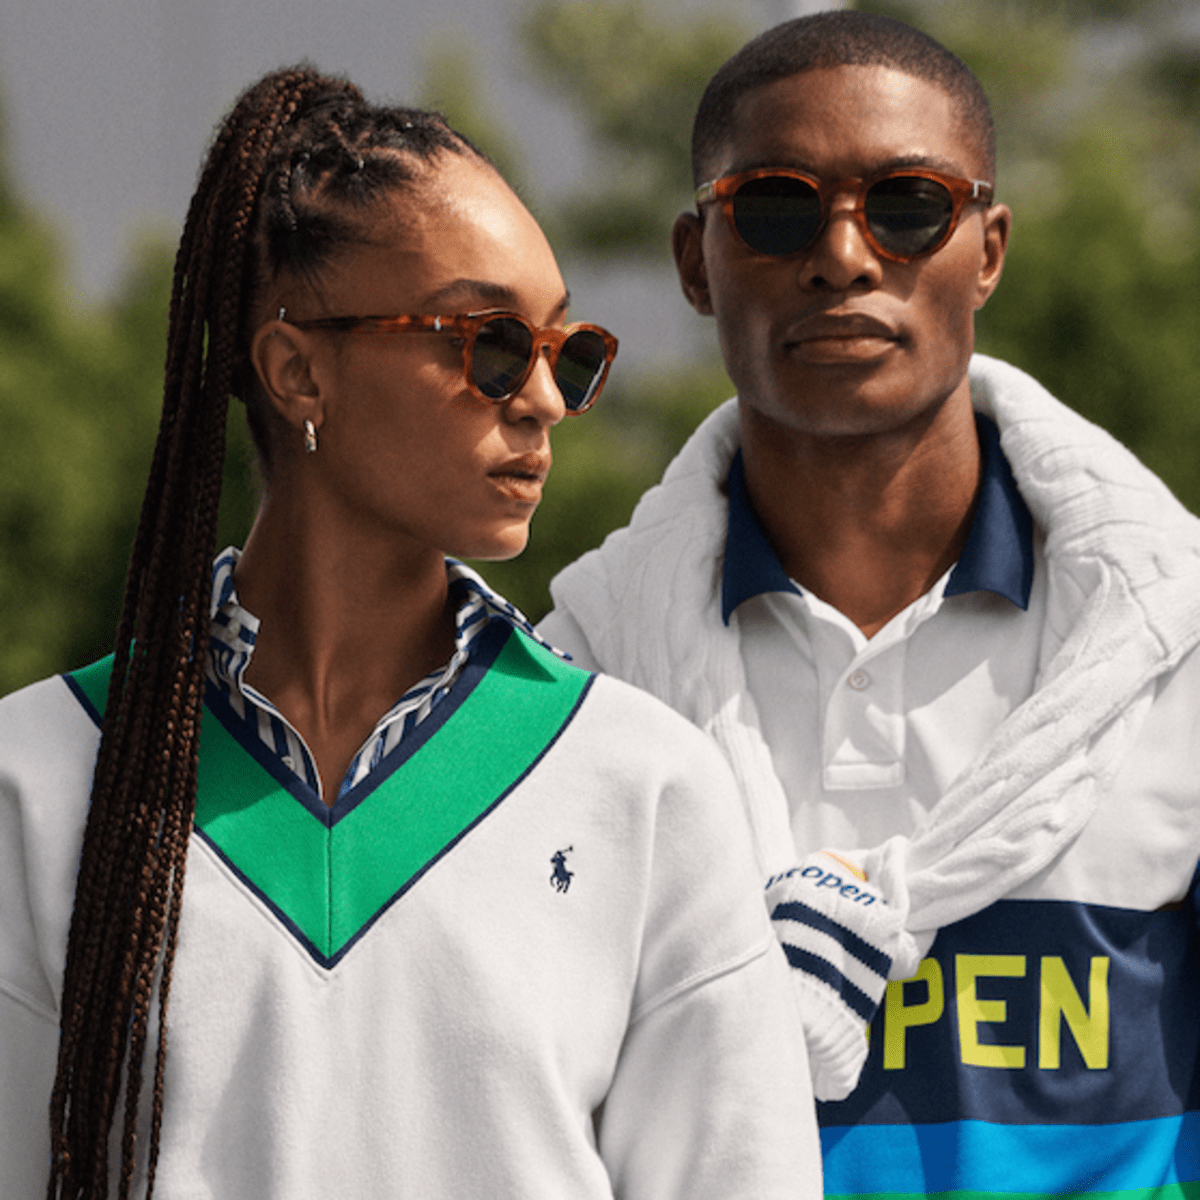 Ralph Lauren's 2022 U.S. Open Collection Is Here for All Your 